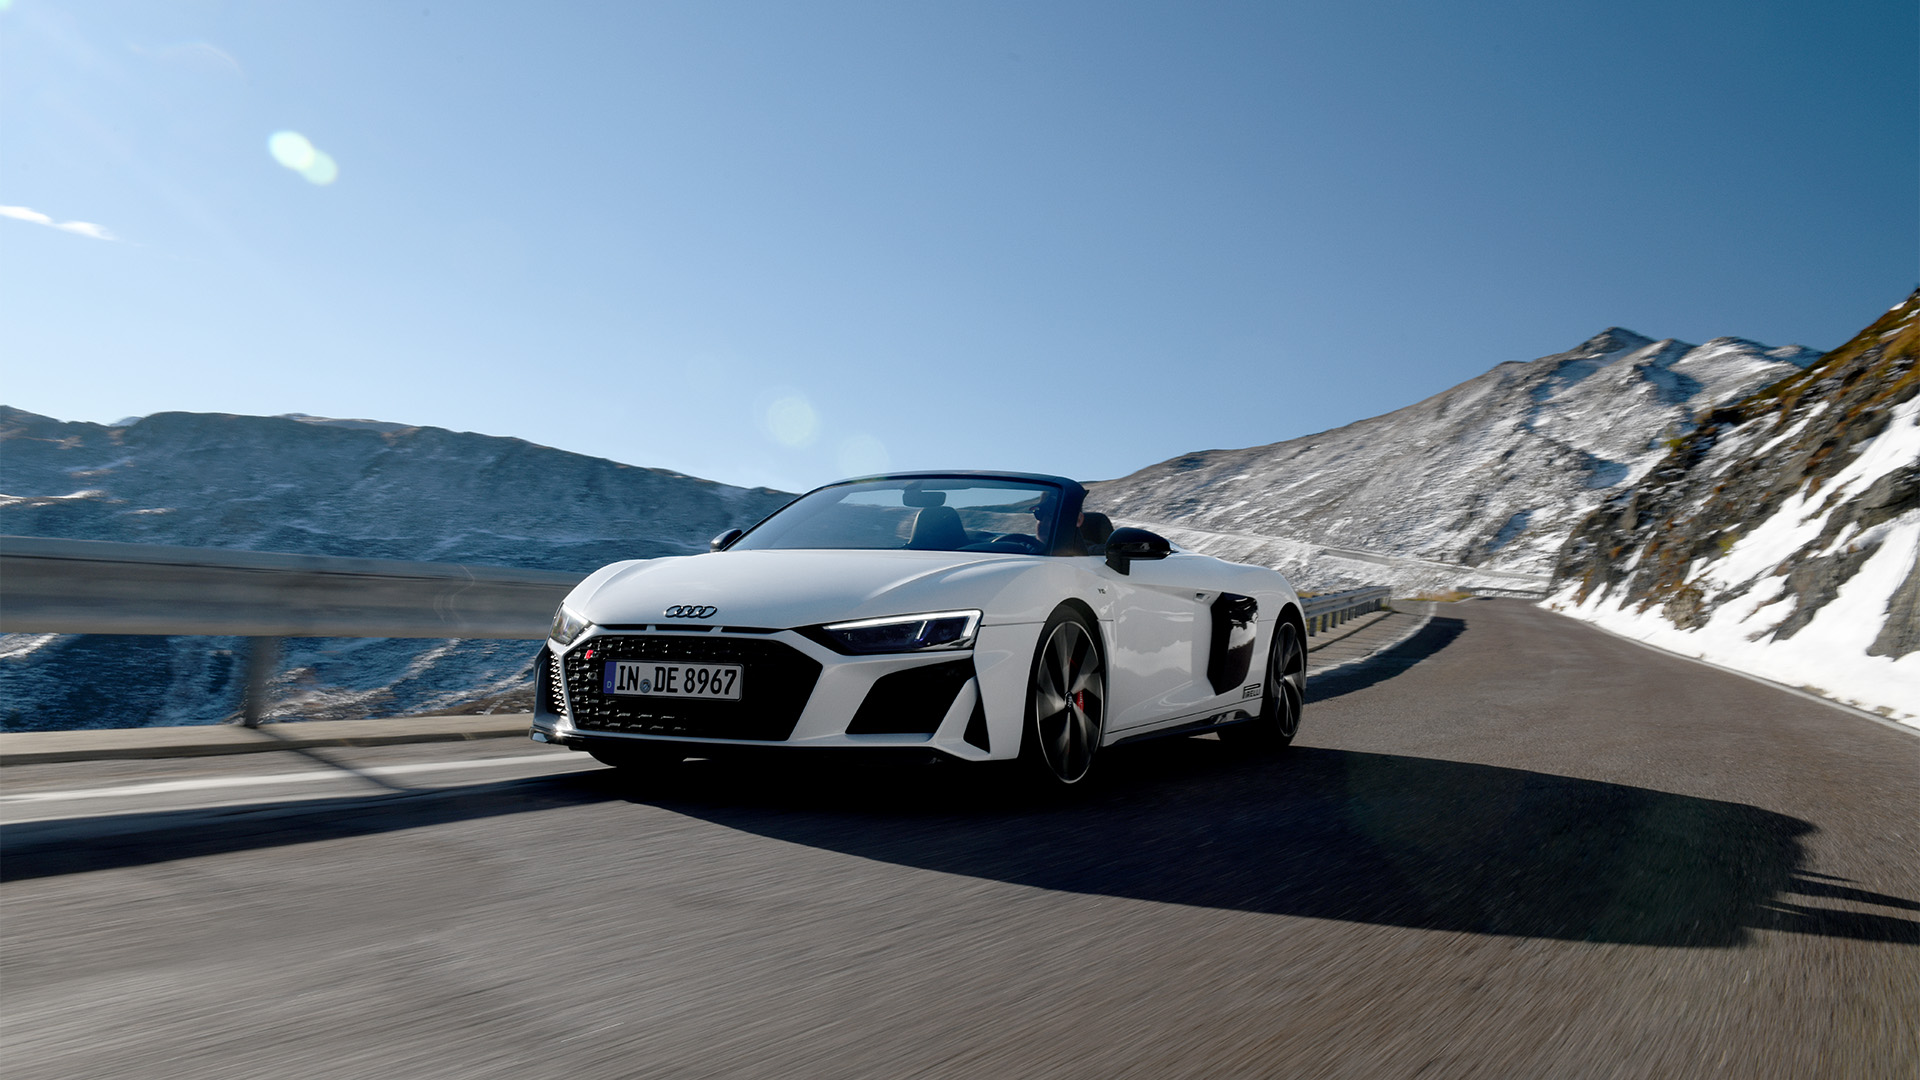 White Audi R8 Spyder V10 performance quattro (front view) driving on a road in the mountains under a blue sky